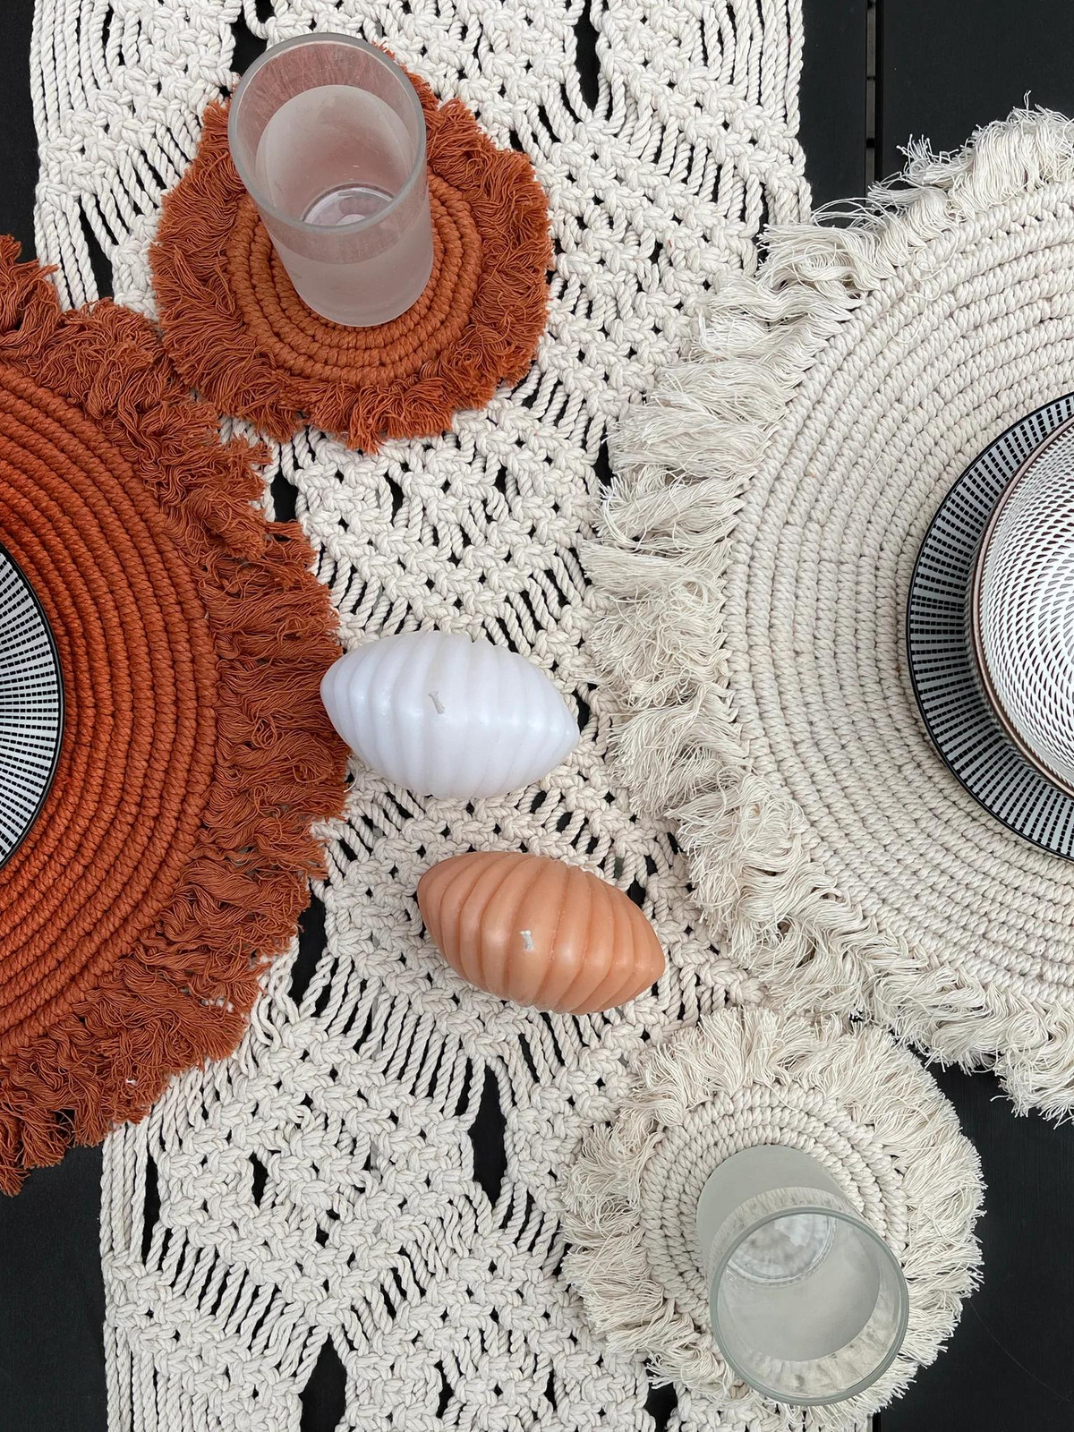 handcrafted macrame coasters made in India shop sustainable tableware natural bohemian eco-friendly home goods